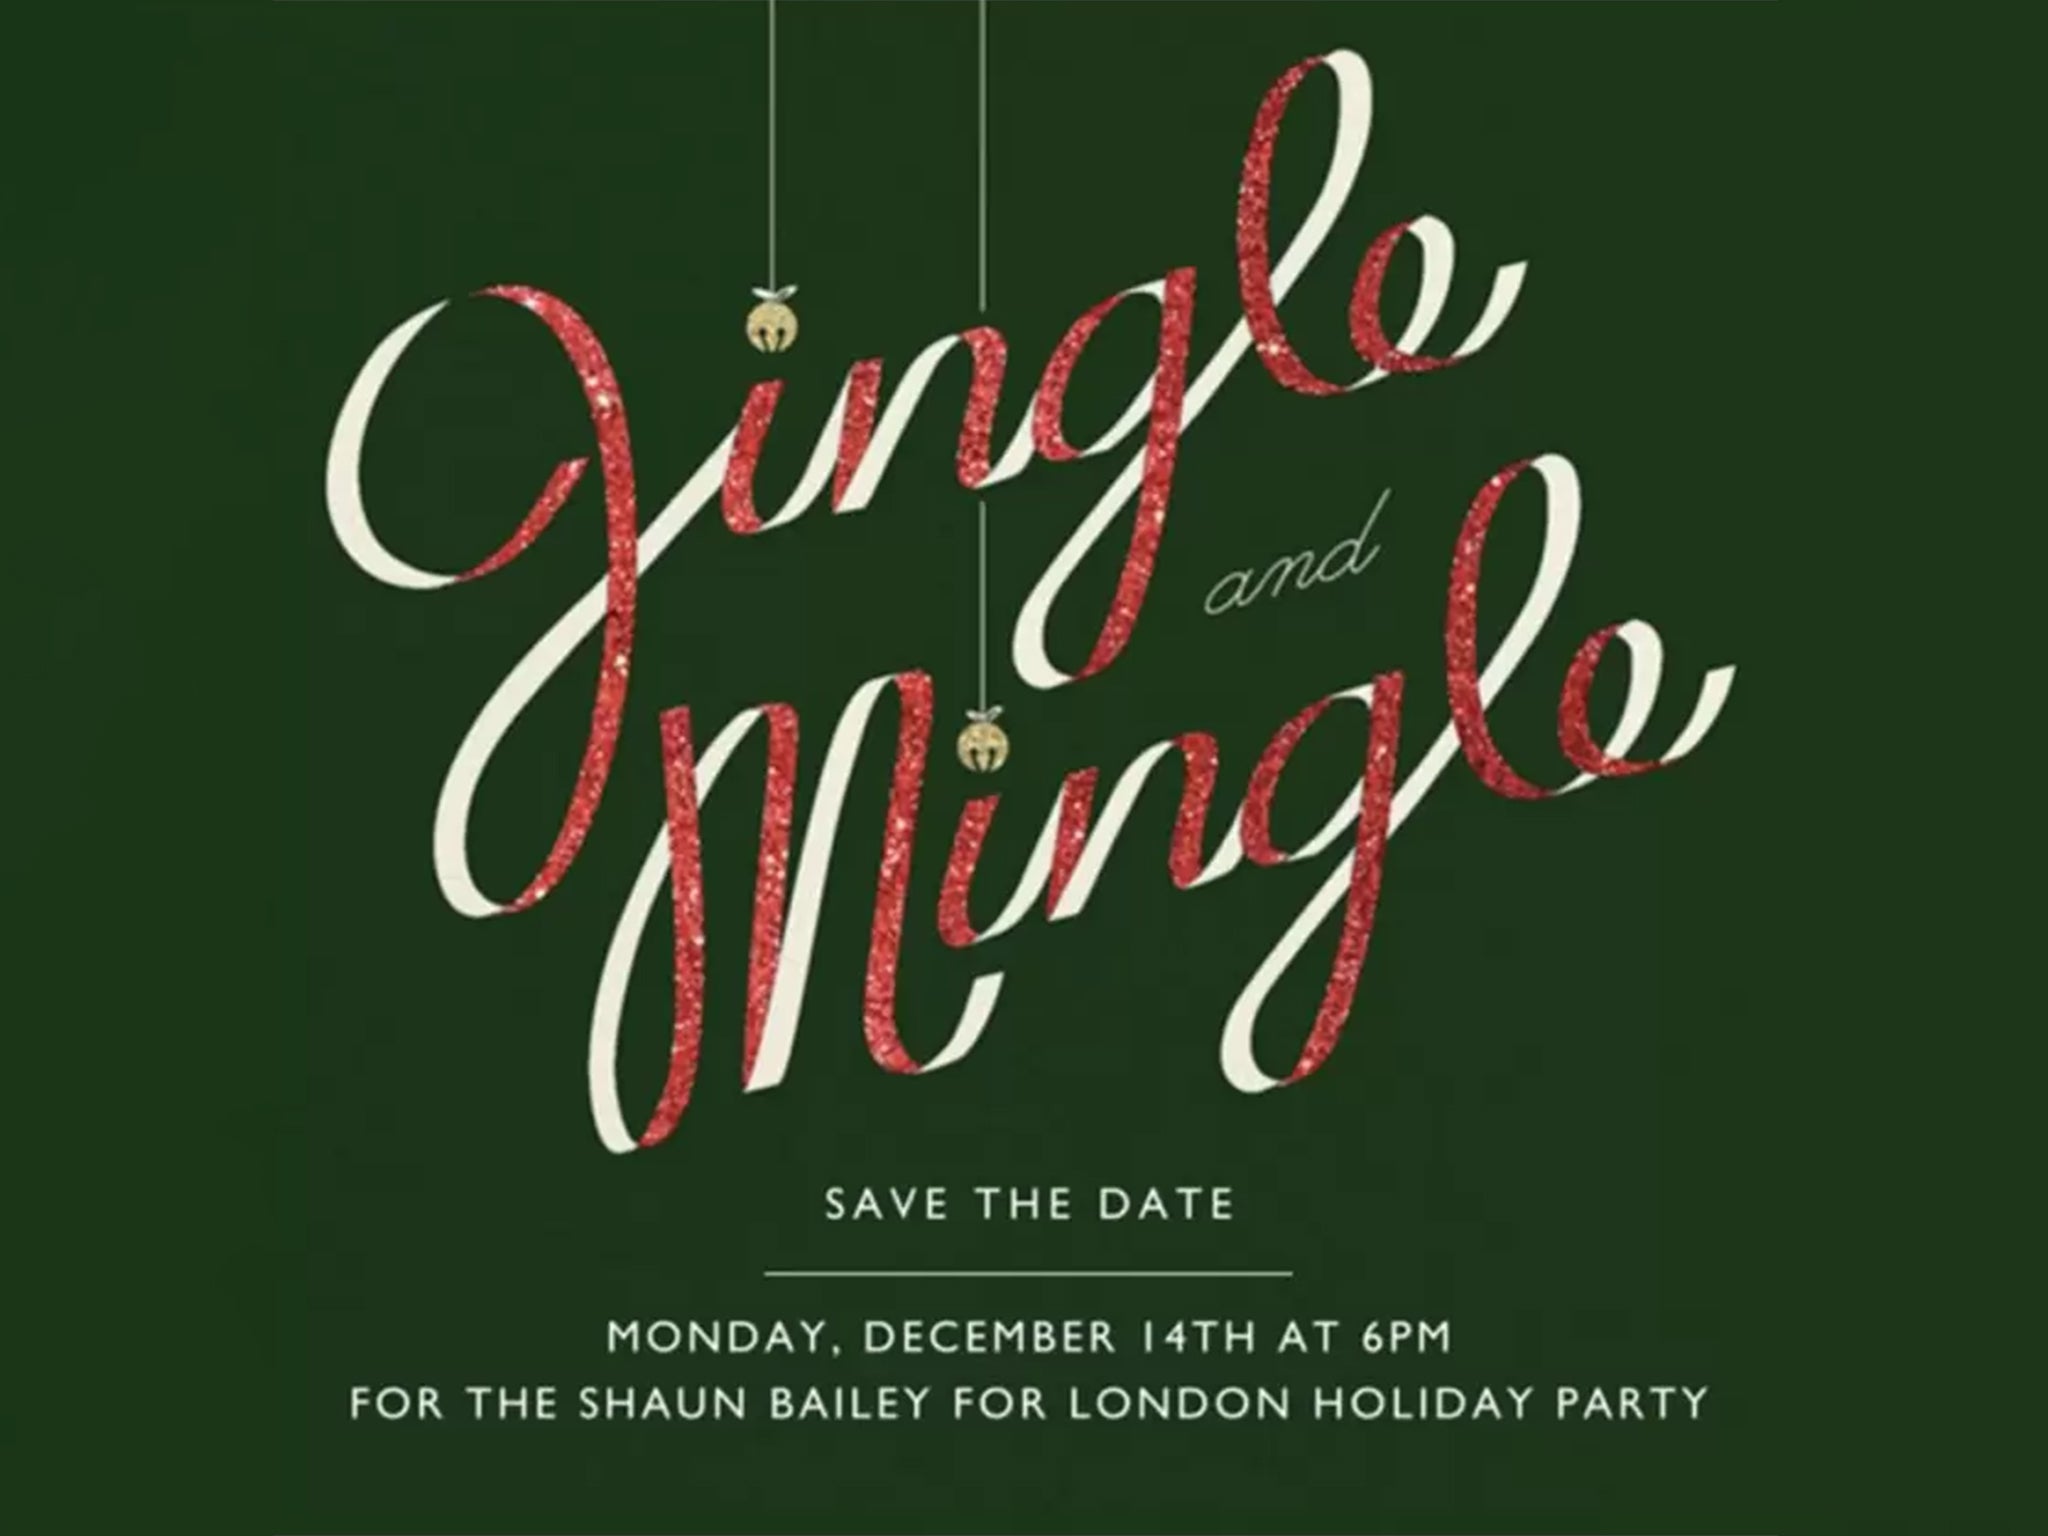 All welcome: invitation to the ‘Minglegate’ Christmas party at CCHQ in December 2020